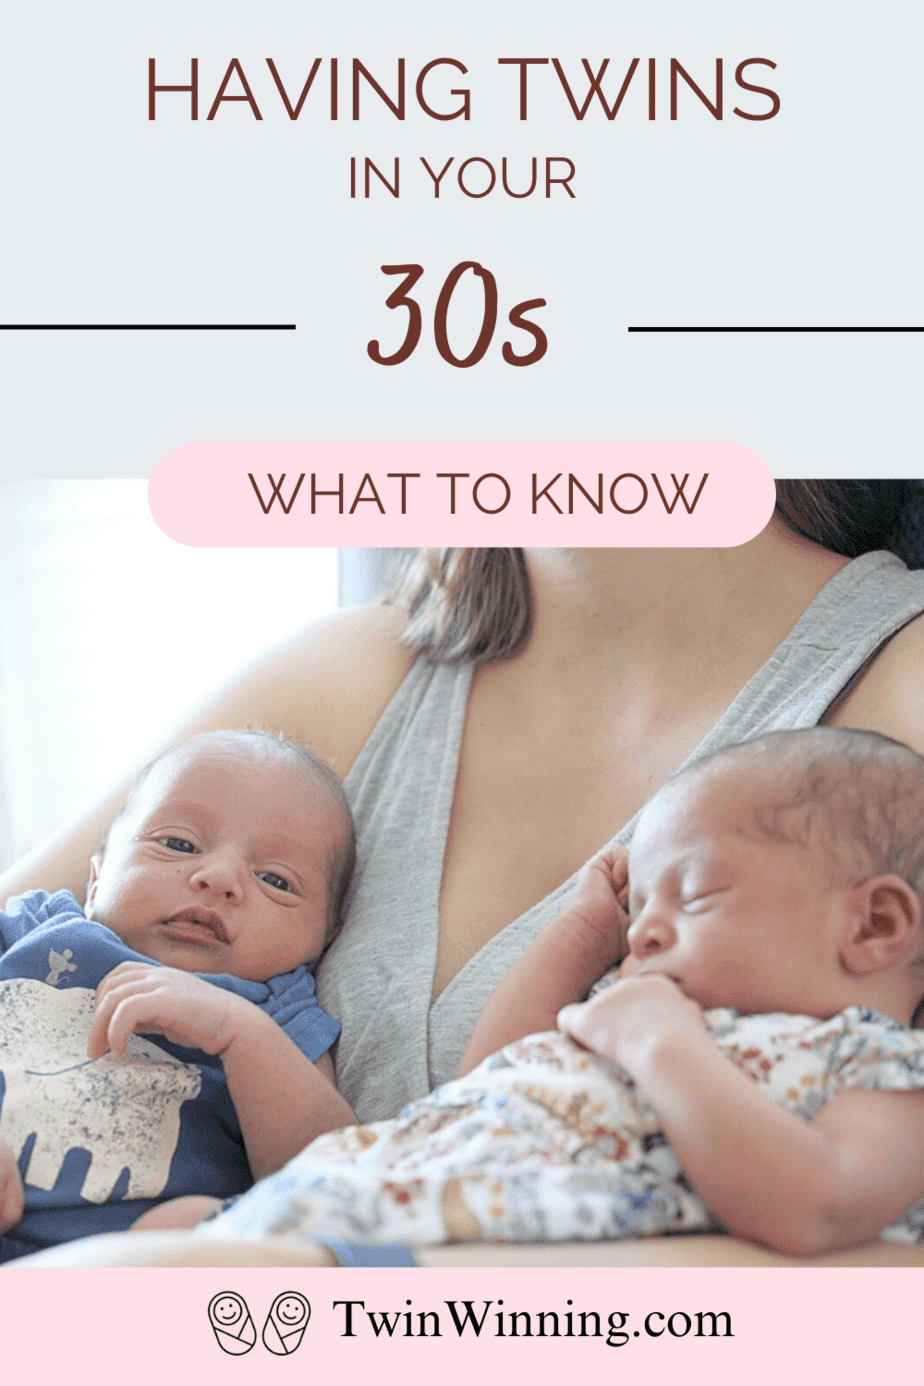 Having twins in your 30s: what to know